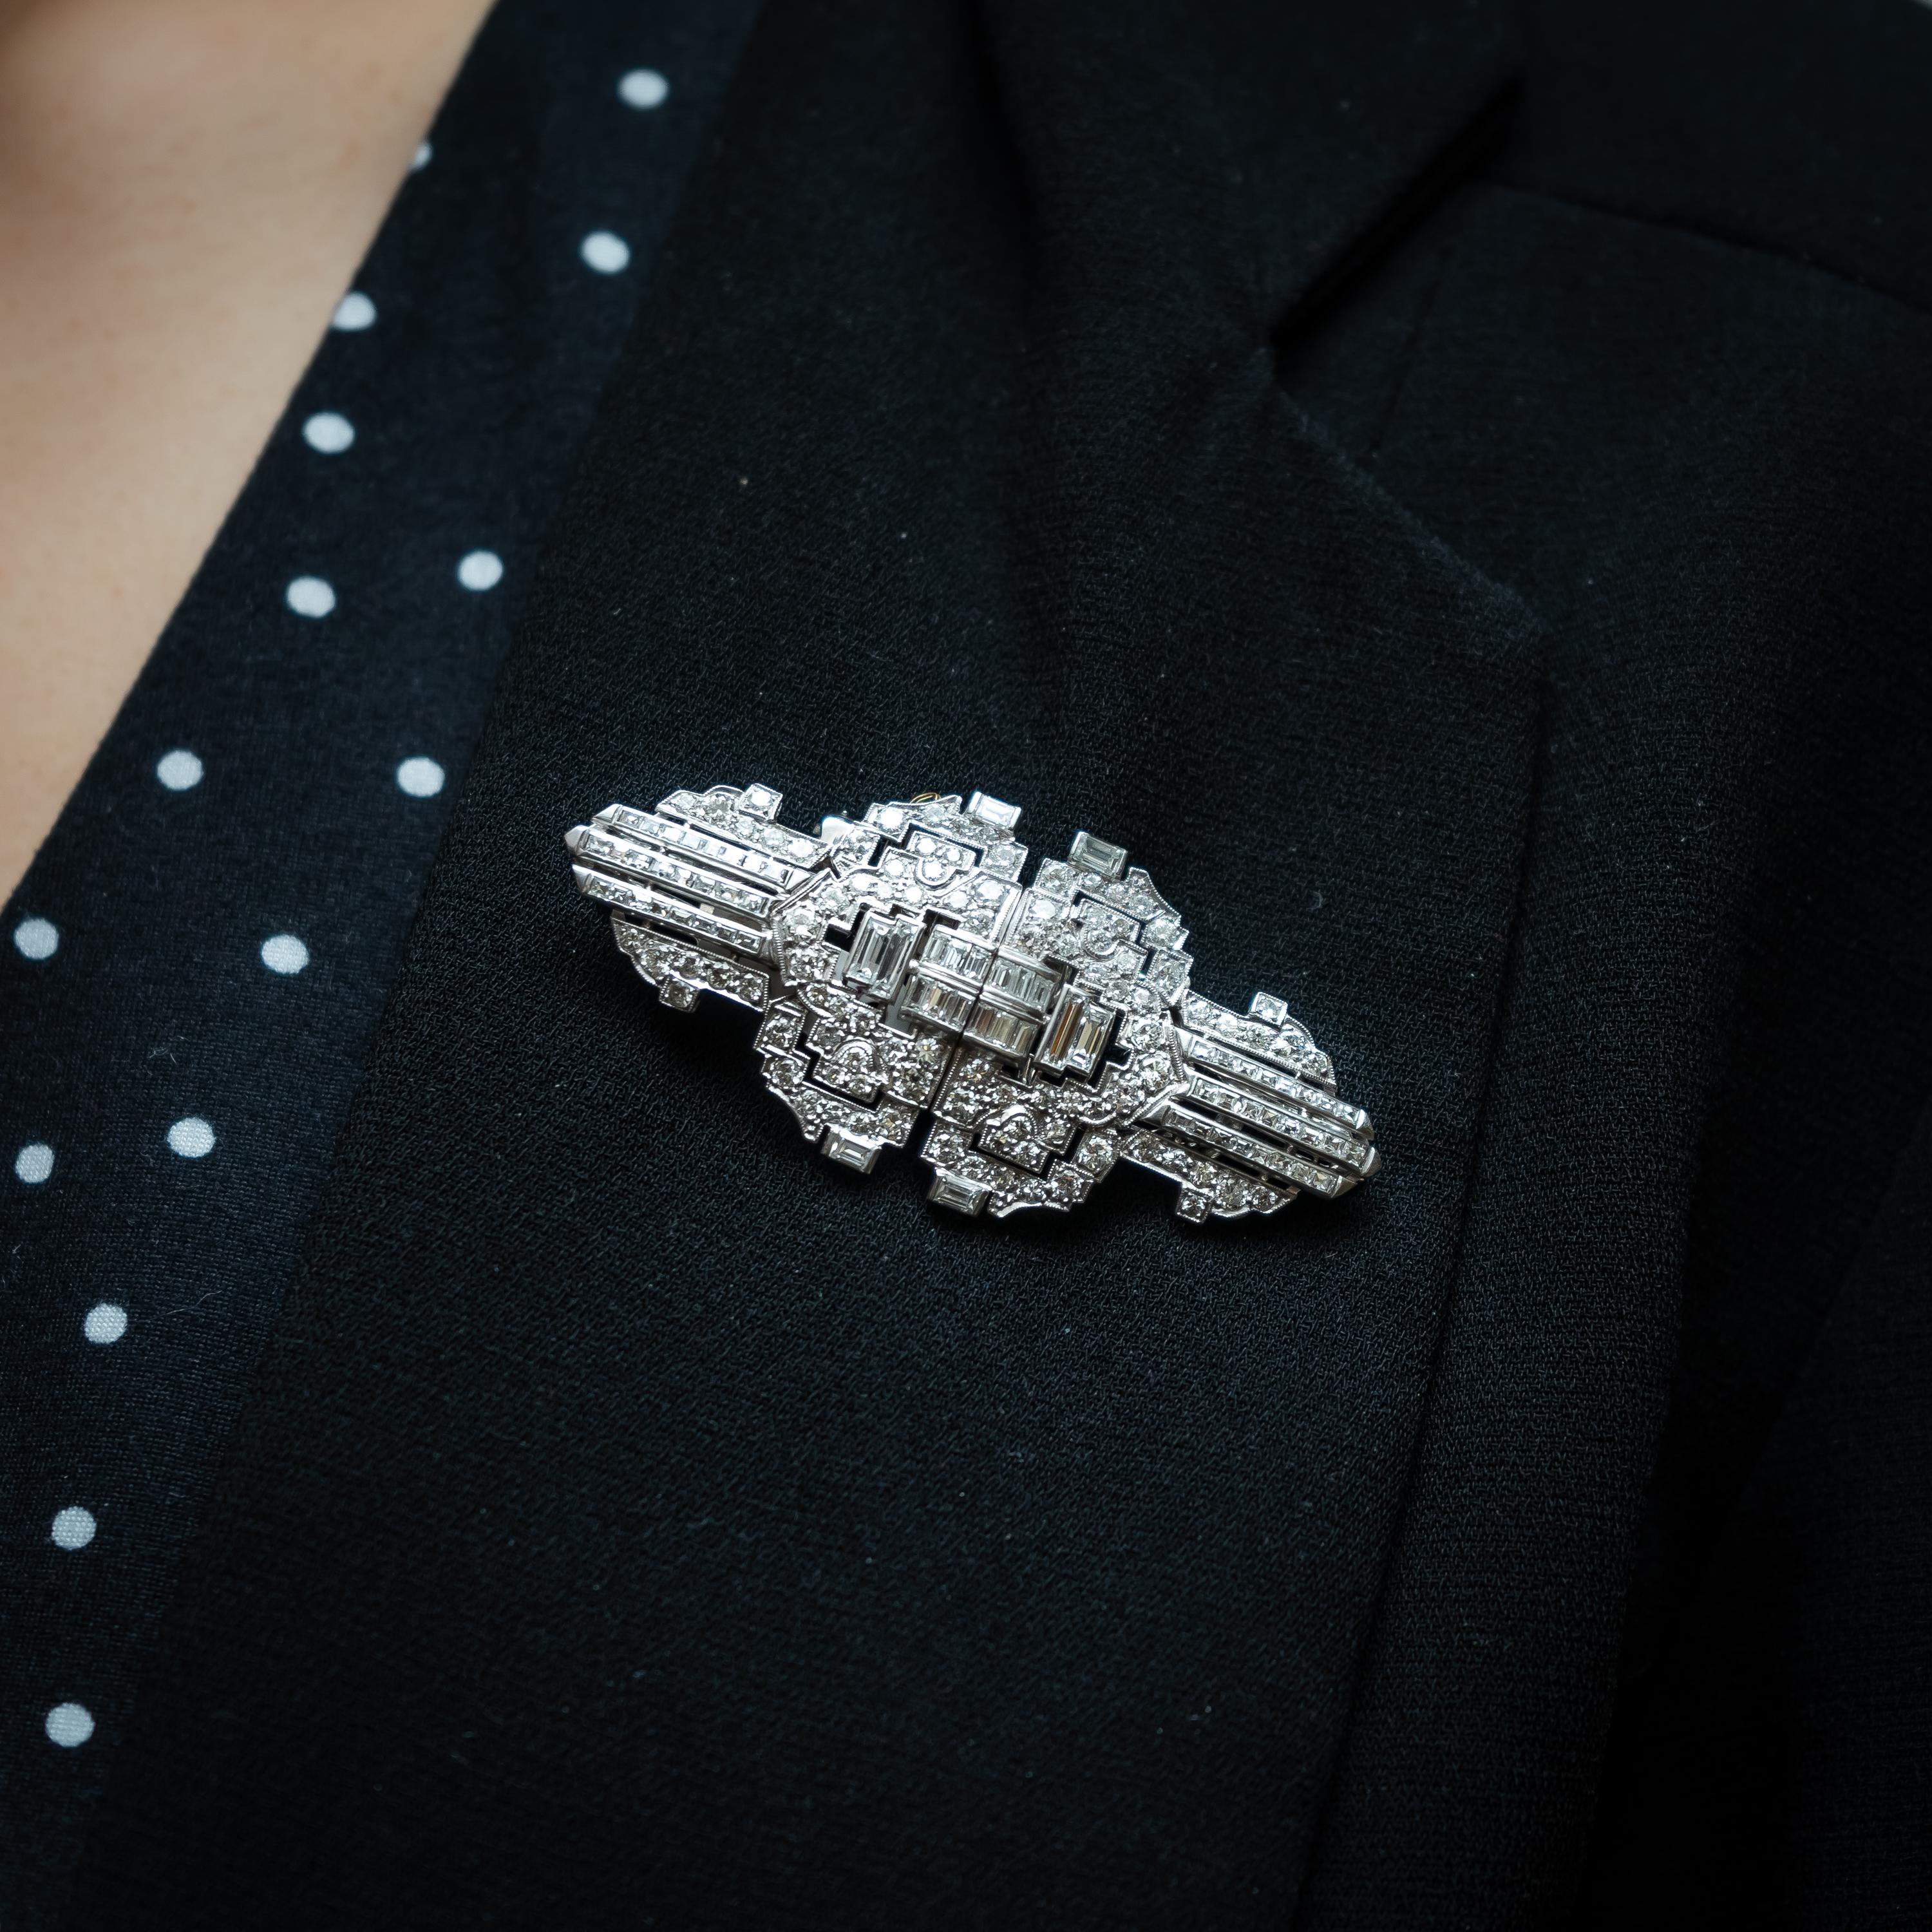 An Art Deco diamond double clip brooch, set with approximately 7.00ct of round brilliant-cut and baguette-cut diamonds, mounted in platinum with white gold fittings, measuring approximately 6.2 x 2.7cm, circa 1930.